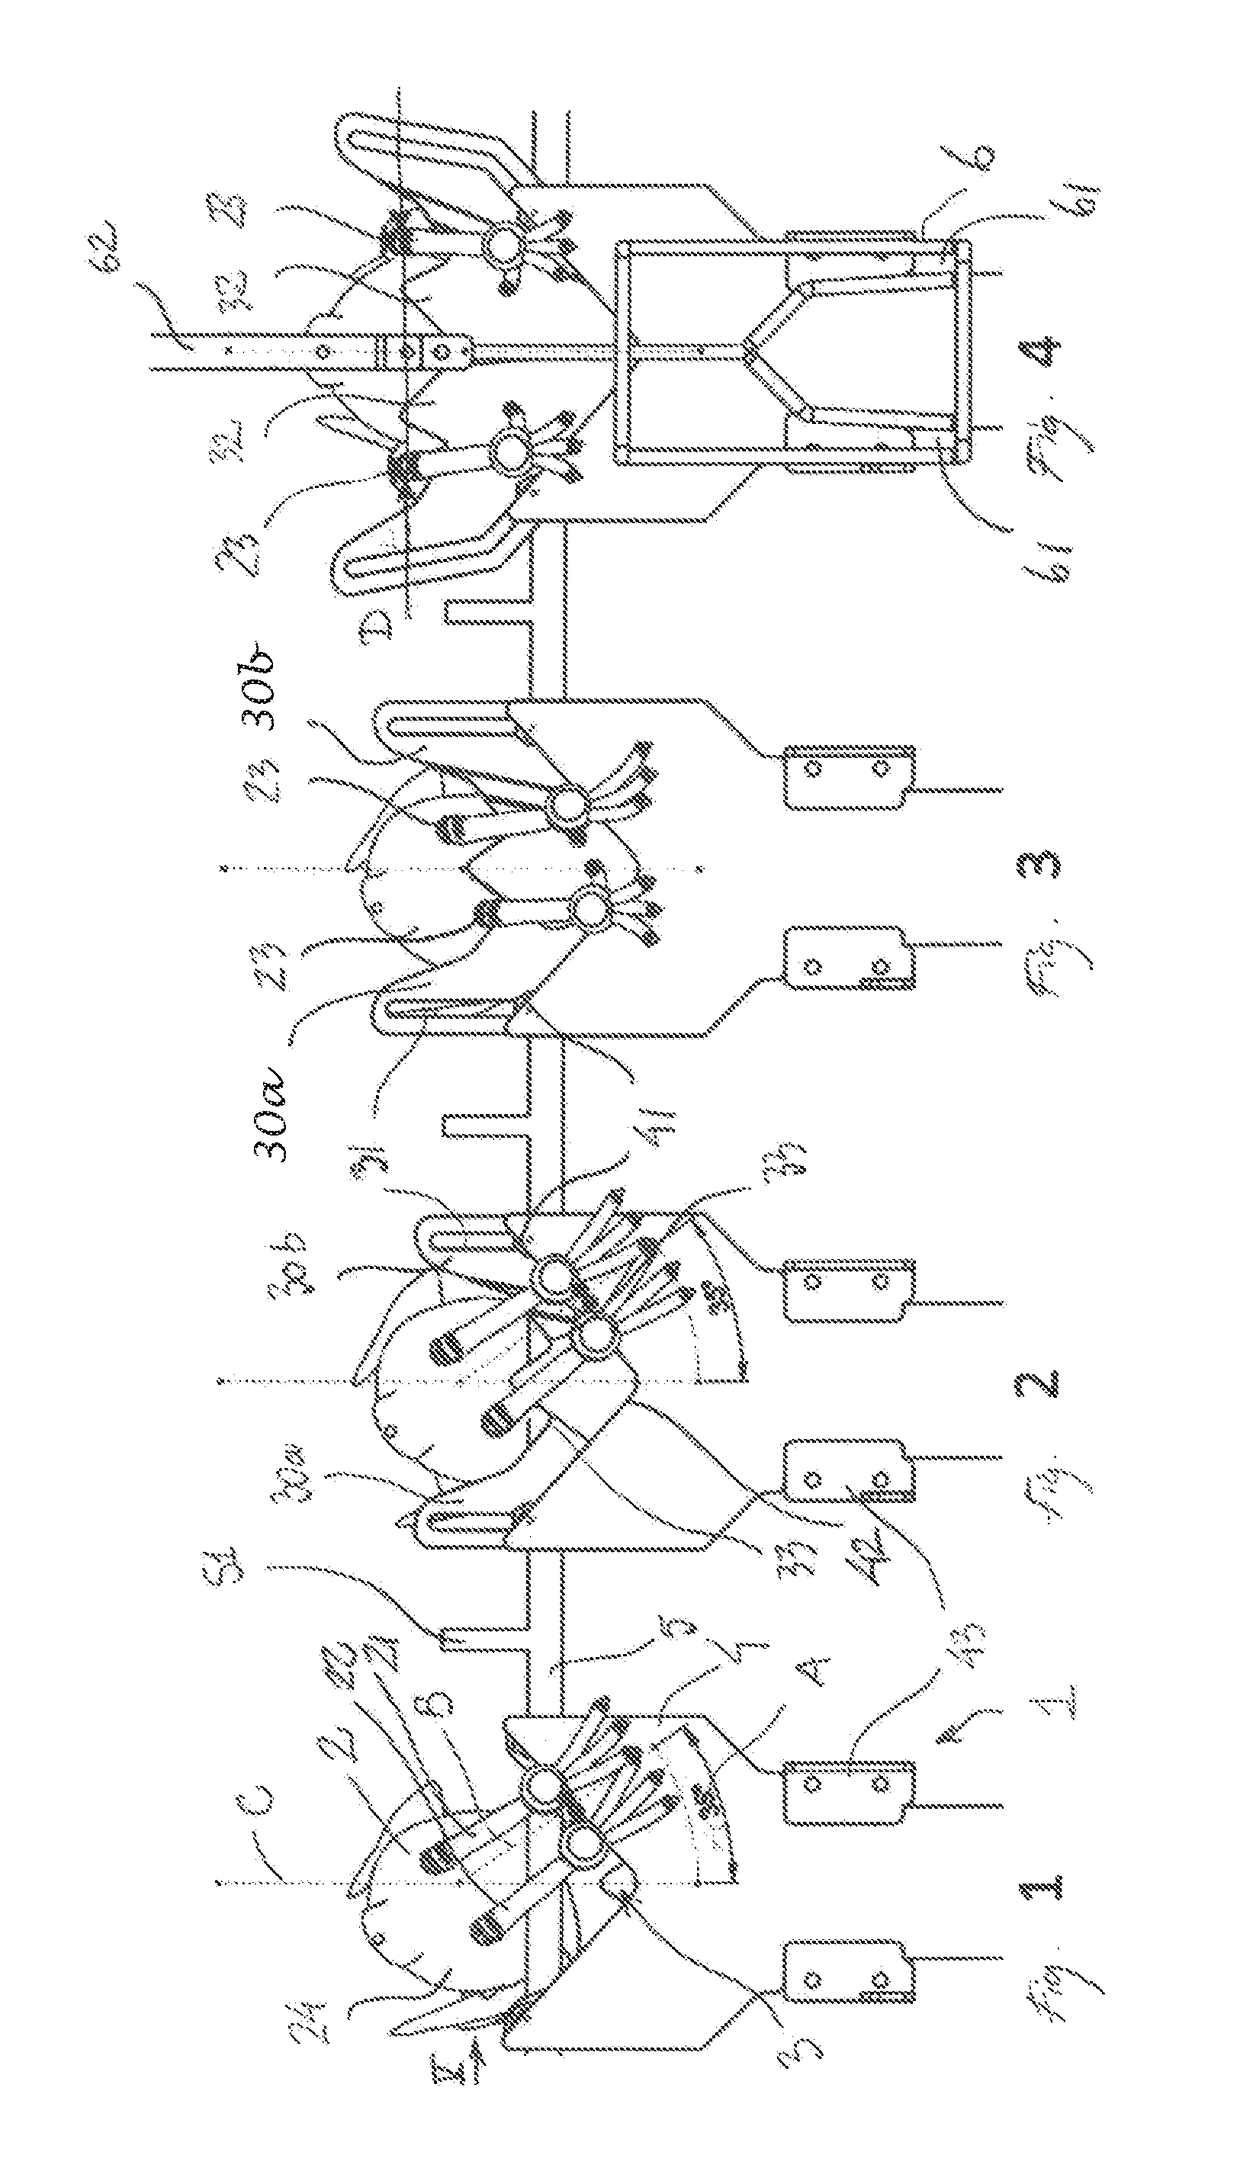 Method and an apparatus for arranging a bird in a position for being suspended from a shackle